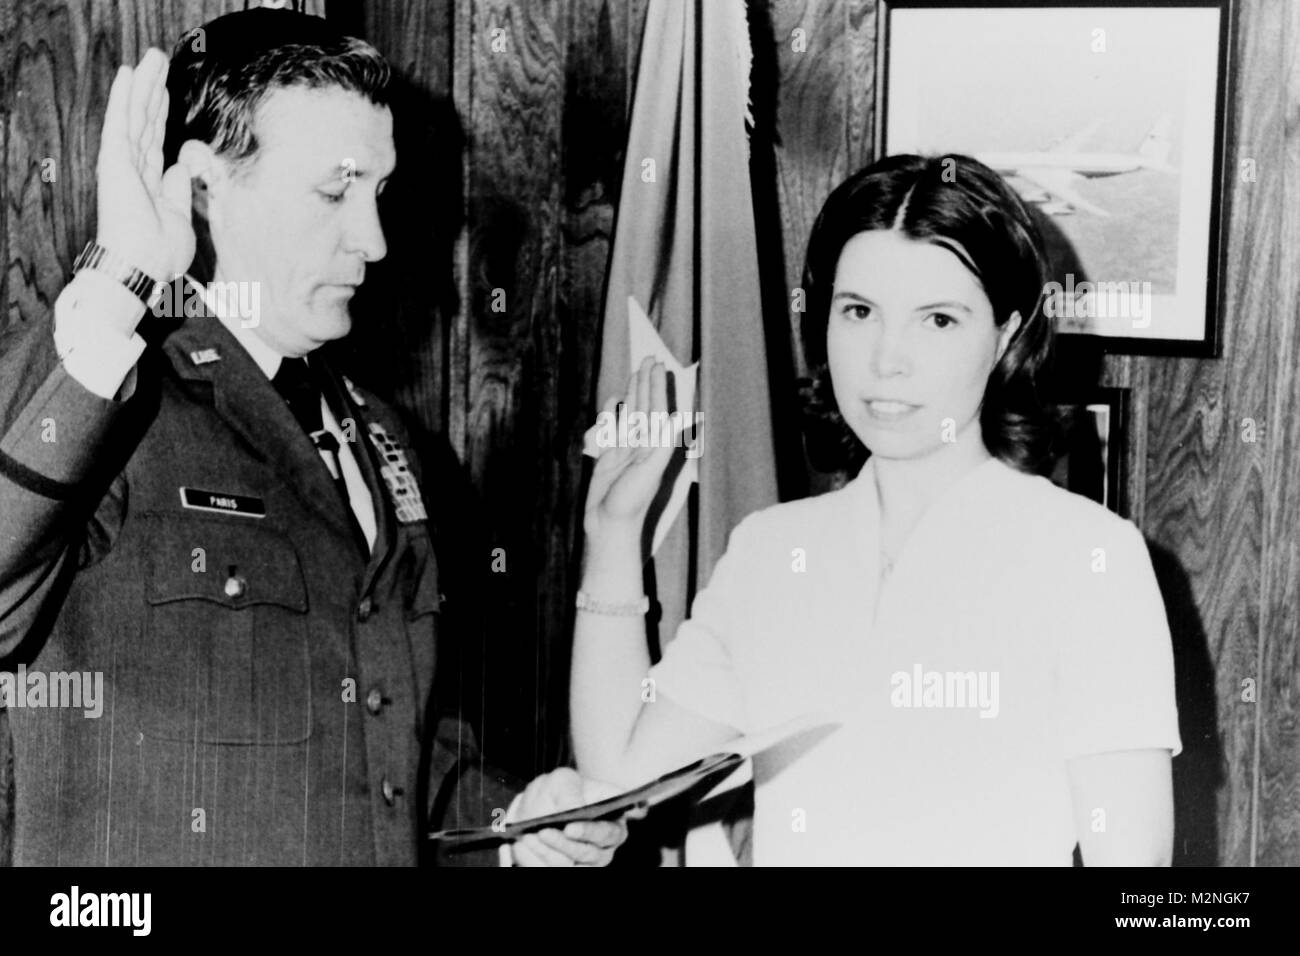 ATLANTA, My 17, 1973 - The Georgia National Guard's first female enlisted member, Pvt. Gail Wagner of Lithonia, takes the oath of enlistment from Maj. Gen. Joel Paris III, Georgia's Adjutant General.  Wagner is married to SP5 Robert D. Wagner, a member of the 166th Light Maintenance Company of Atlanta.  After basic traiing, Pvt. Wagner will join Neadquarters and Headquarters Detachment in Atlanta. First Female Enlistee by Georgia National Guard Stock Photo